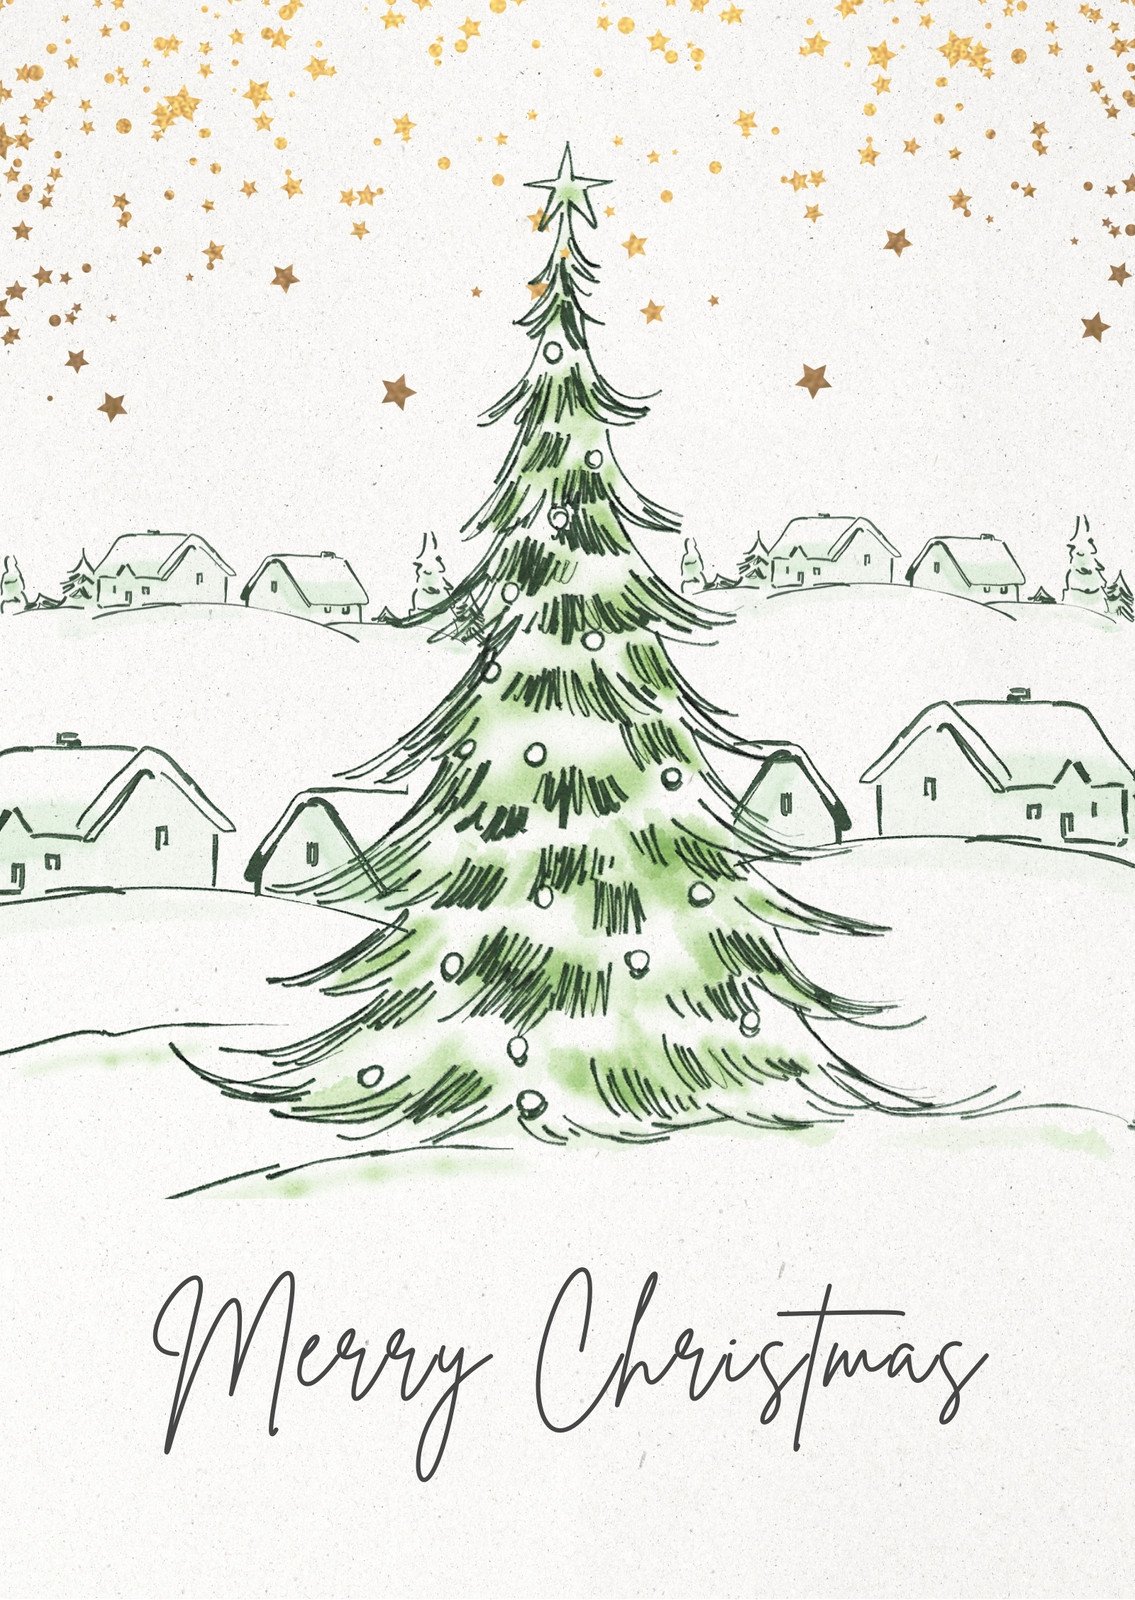 Make Christmas Cards with Google Drawing | Digital Art – Teacher's Notes